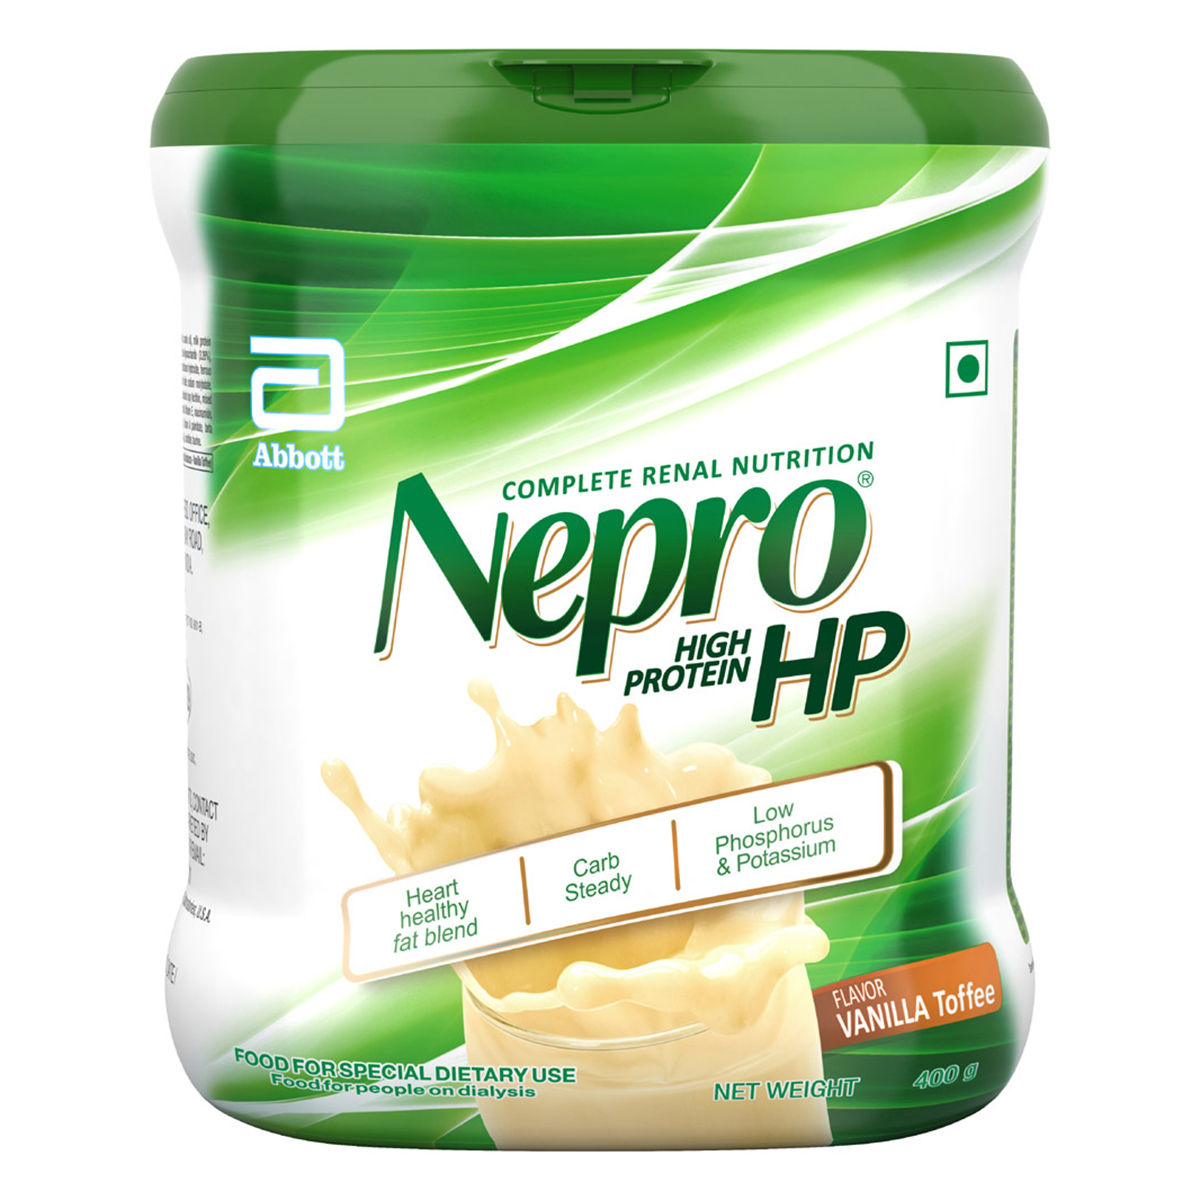 Buy Nepro Complete Renal Nutrition High Protein Vanilla Toffee Flavour Powder for Adults, 400 gm  Online